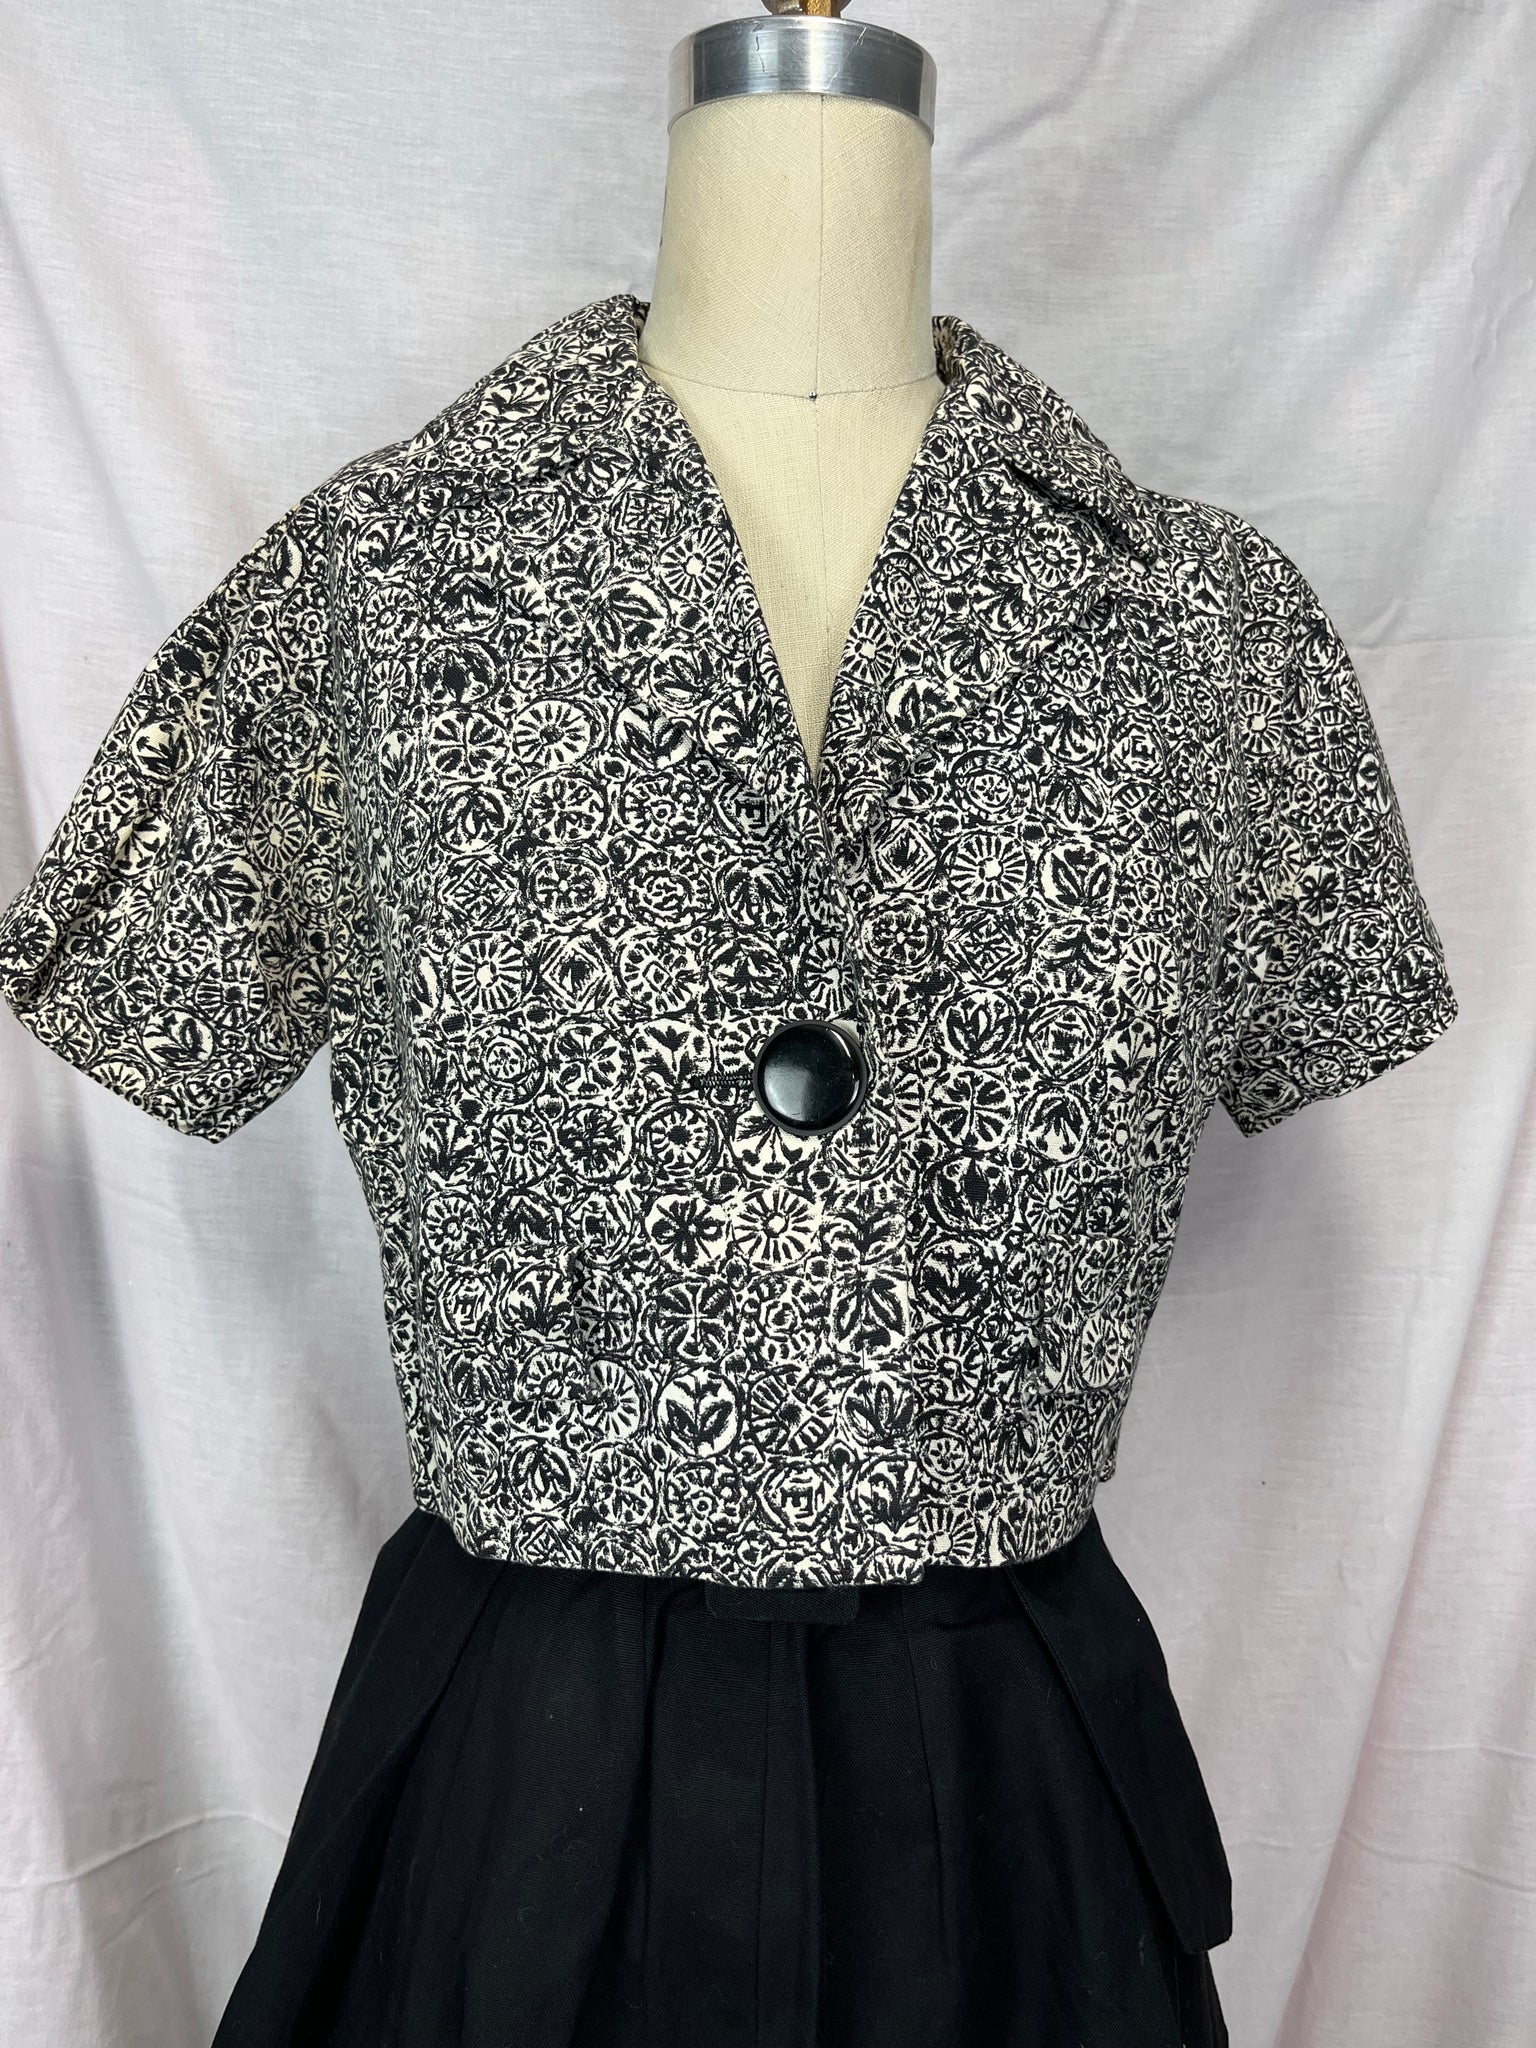 Vintage 1940s 50s | Black and White Crop Top Pinup Rockabilly